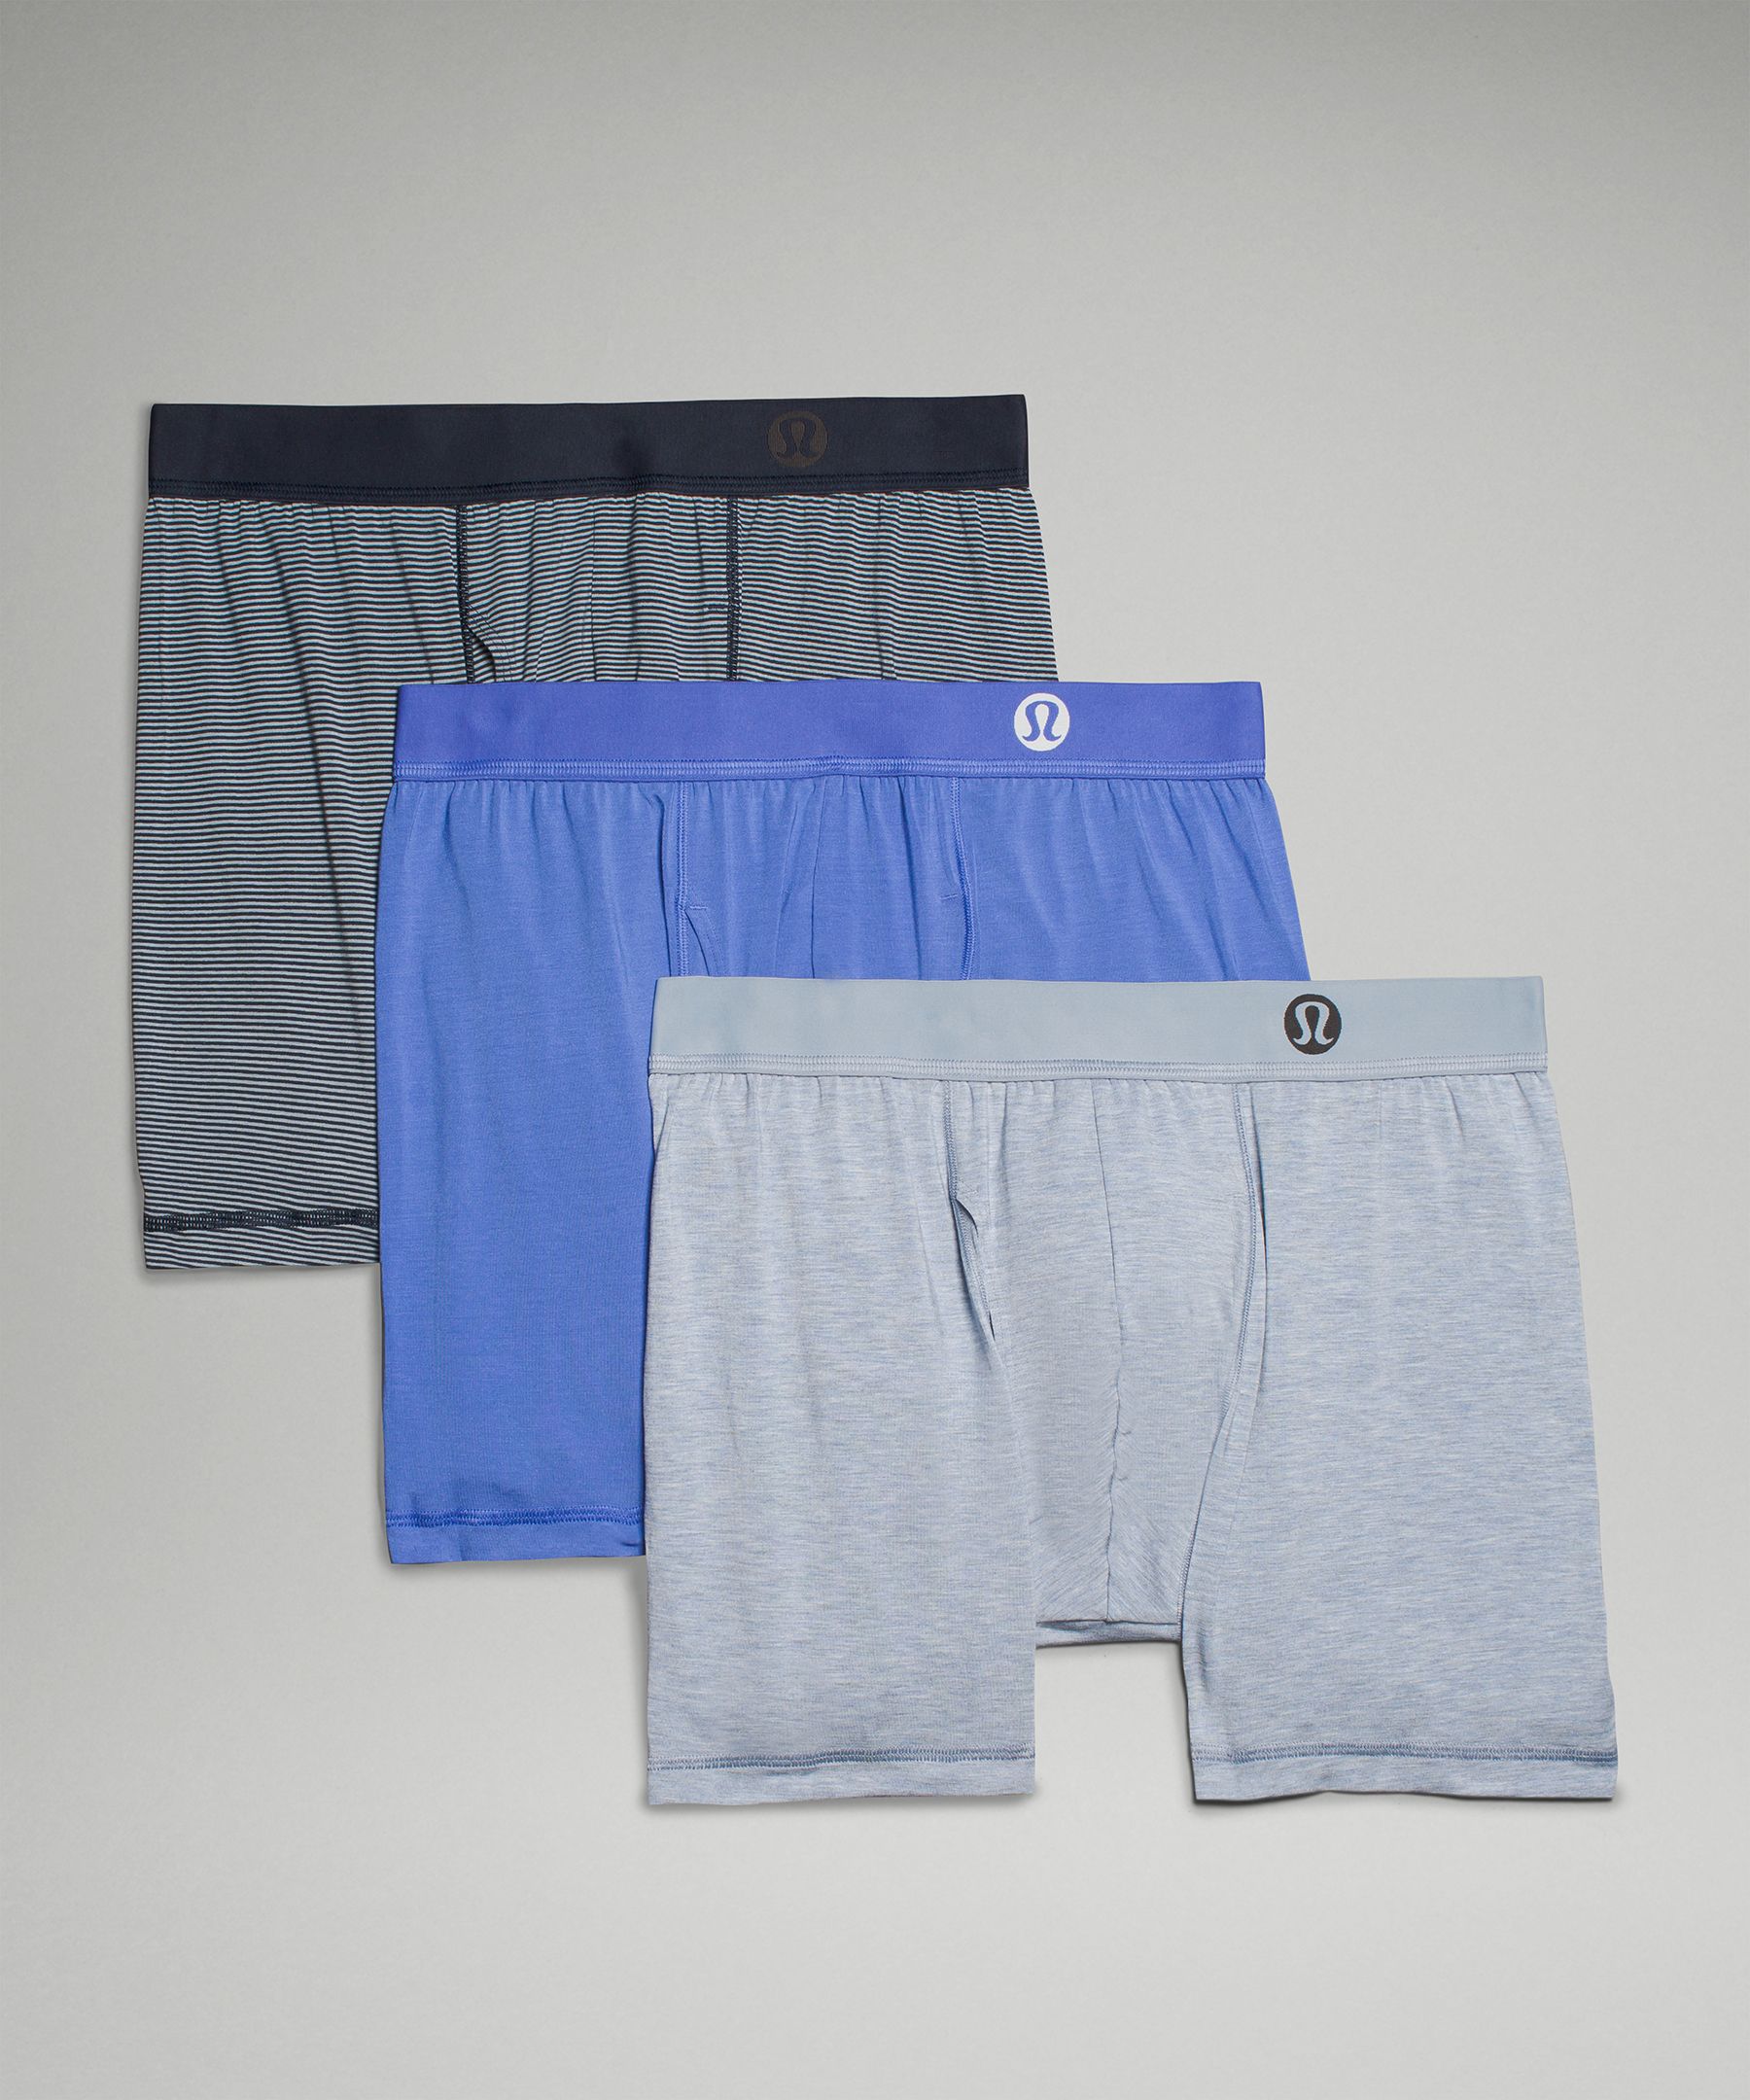 Always In Motion Boxer with Fly 5 *3 Pack | Men's Underwear | lululemon